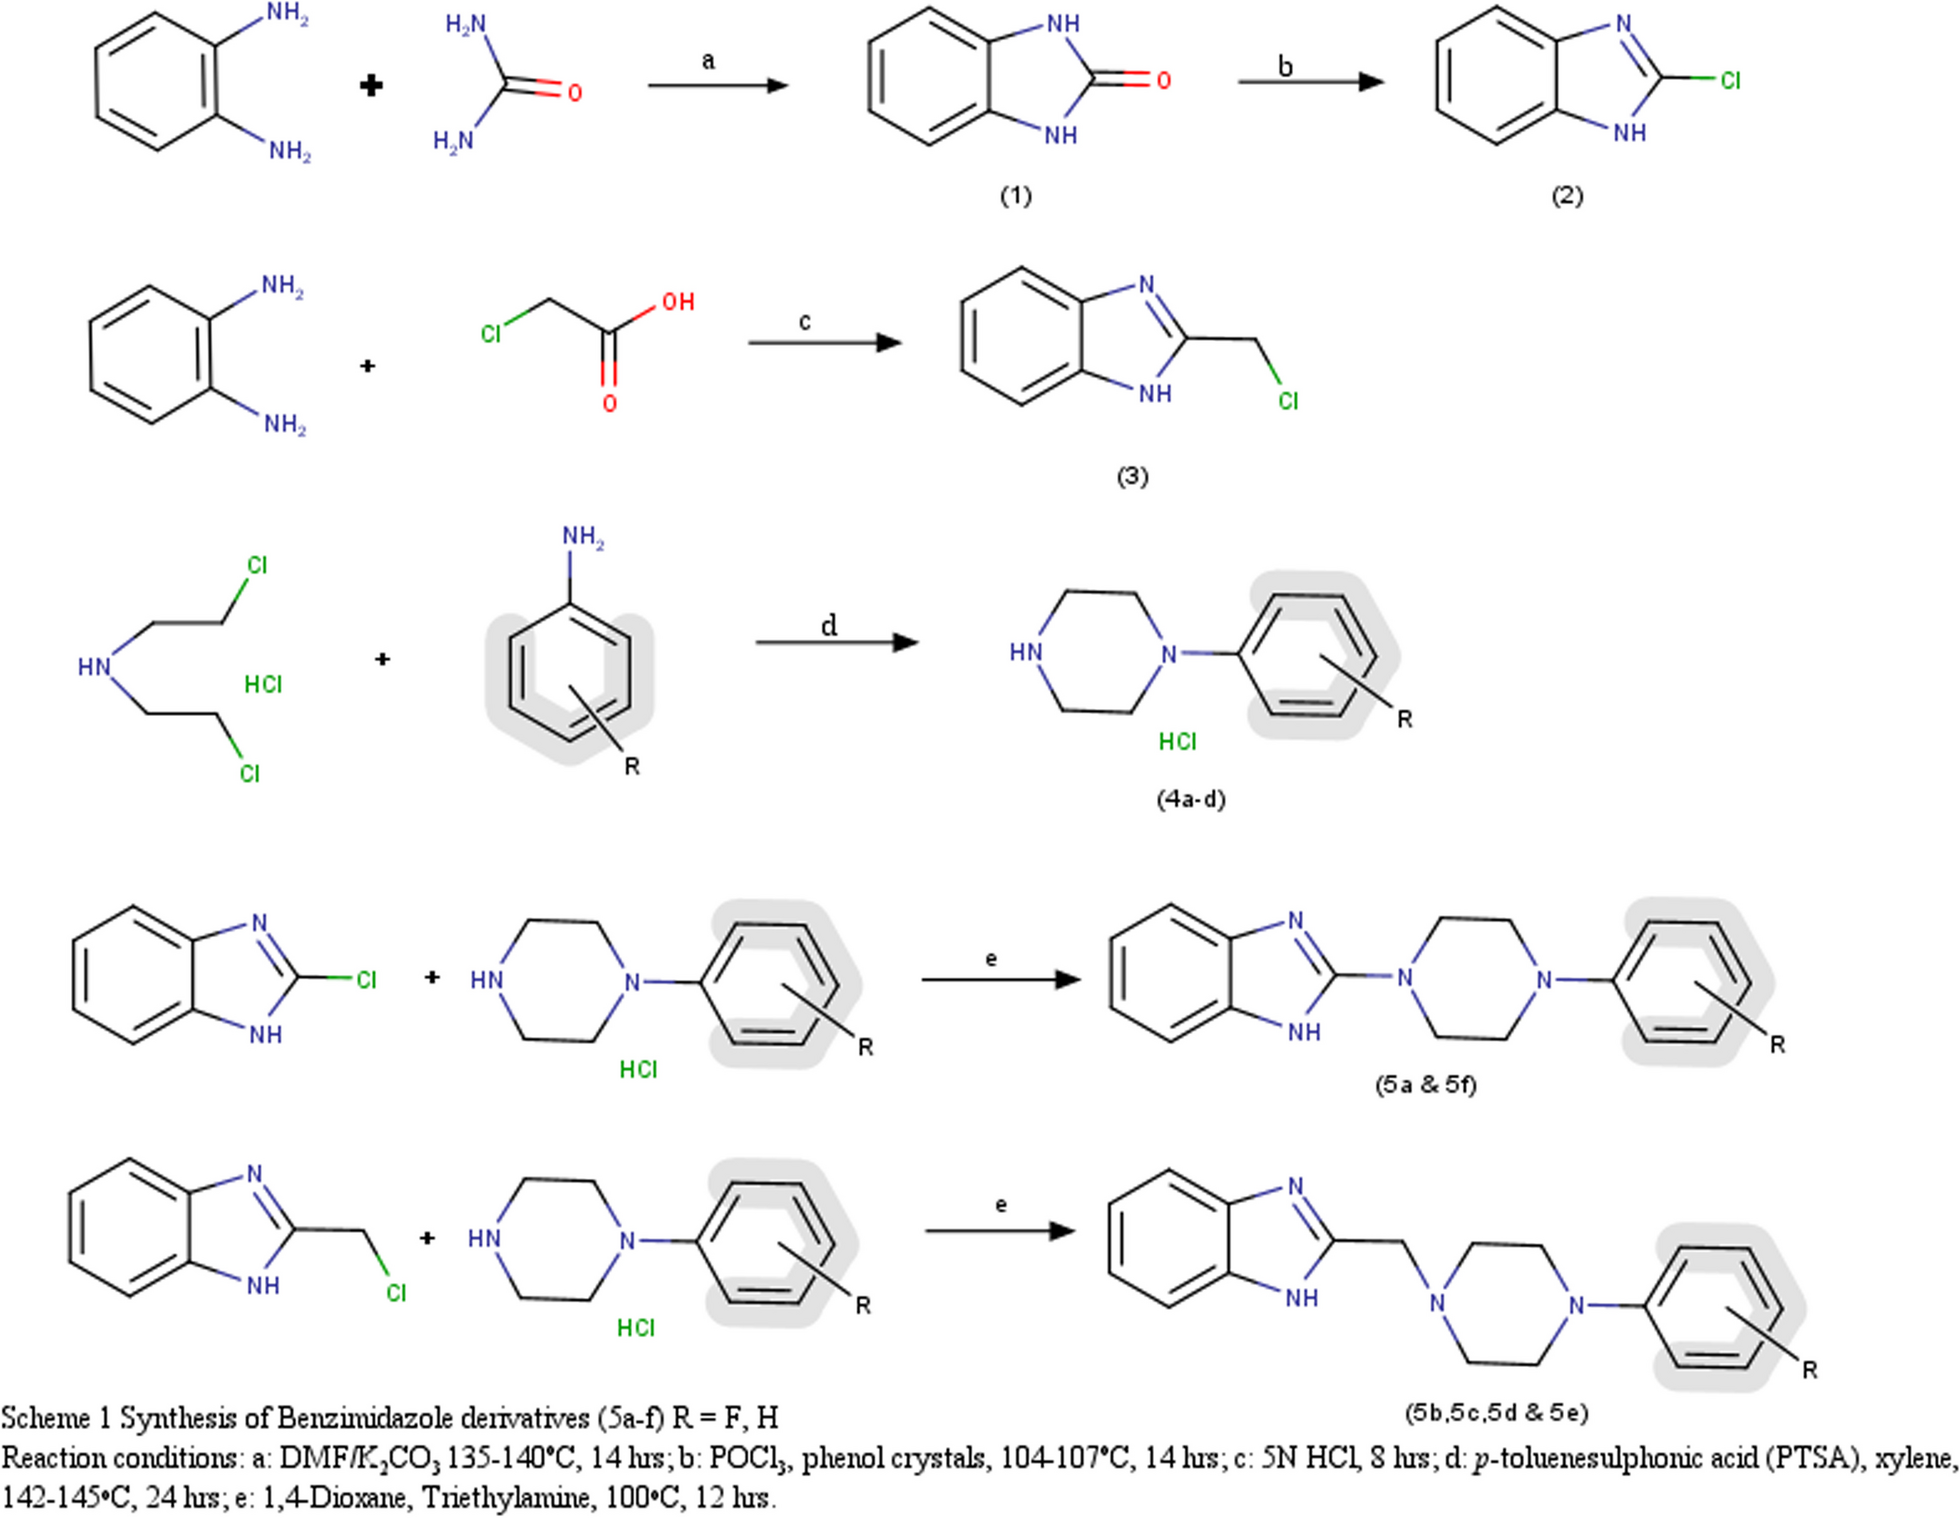 Design, synthesis, and evaluation of anxiolytic activity of 2-(4-phenylpiperazin-1-yl)-1H-benz[d]imidazole and 2-(4-phenylpiperazin-1-methyl)-1H-benz[d]imidazole derivatives